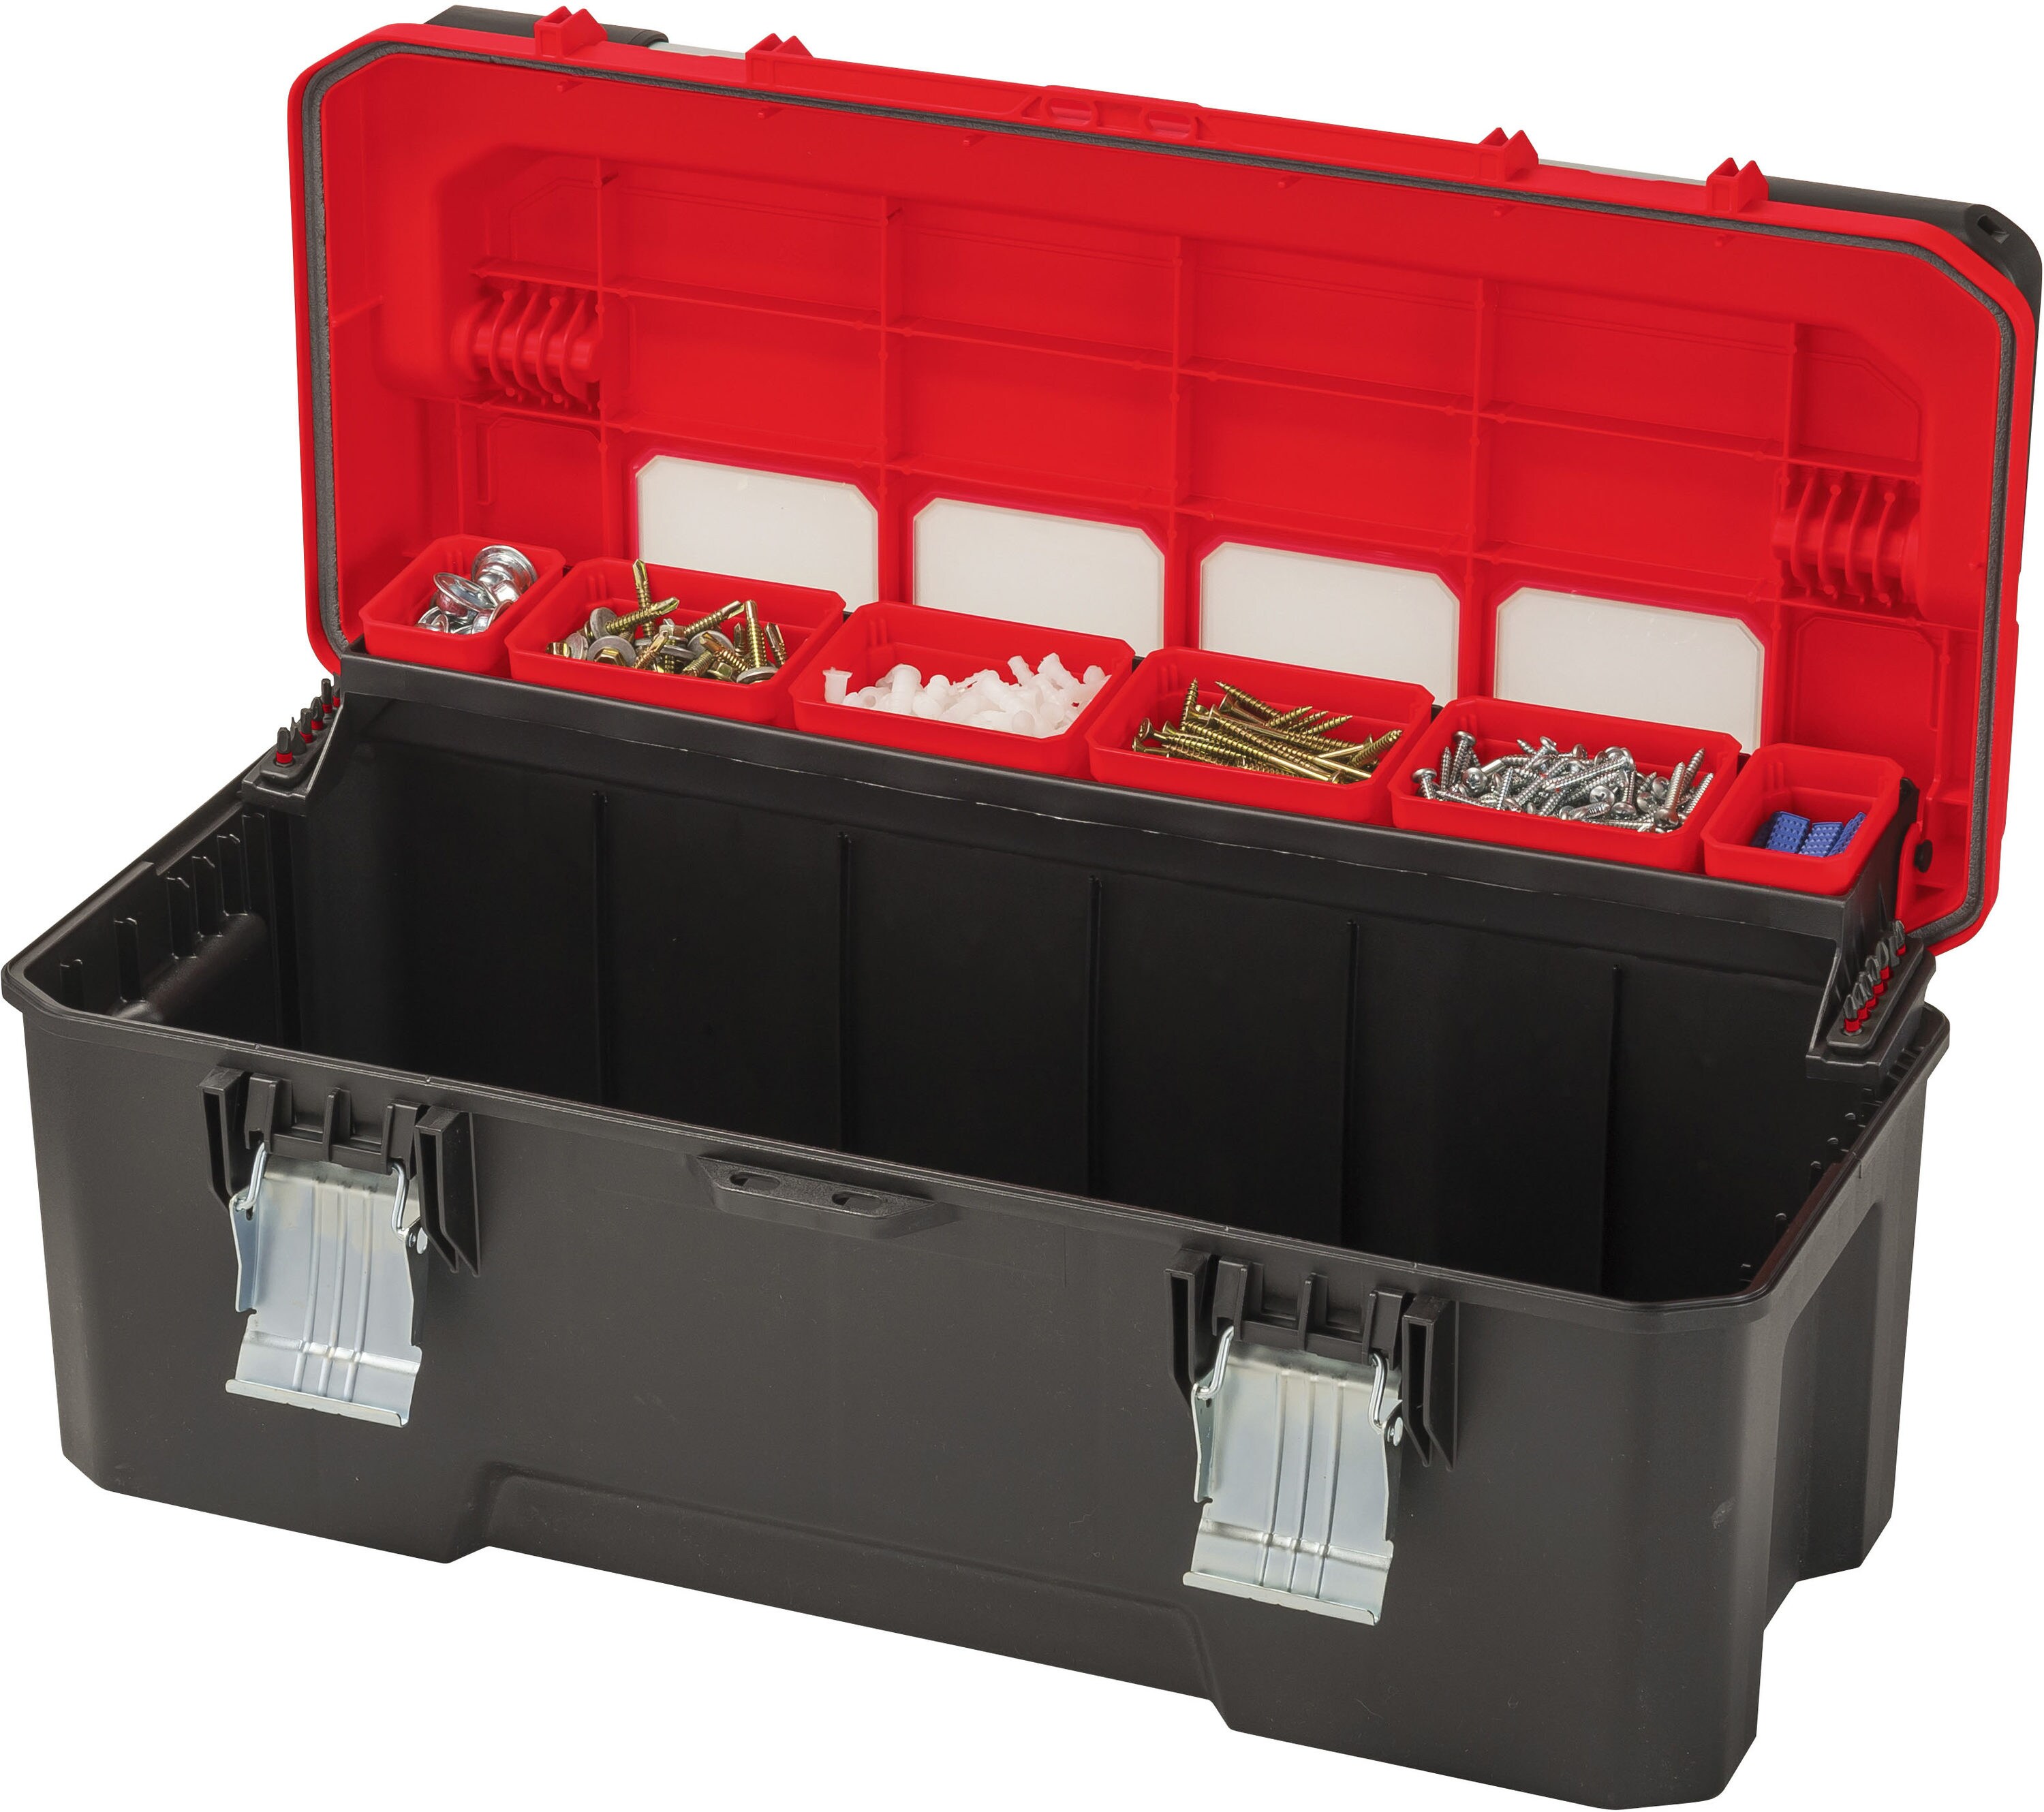 CRAFTSMAN Pro 20-in Multiple Colors/Finishes Metal Lockable Tool